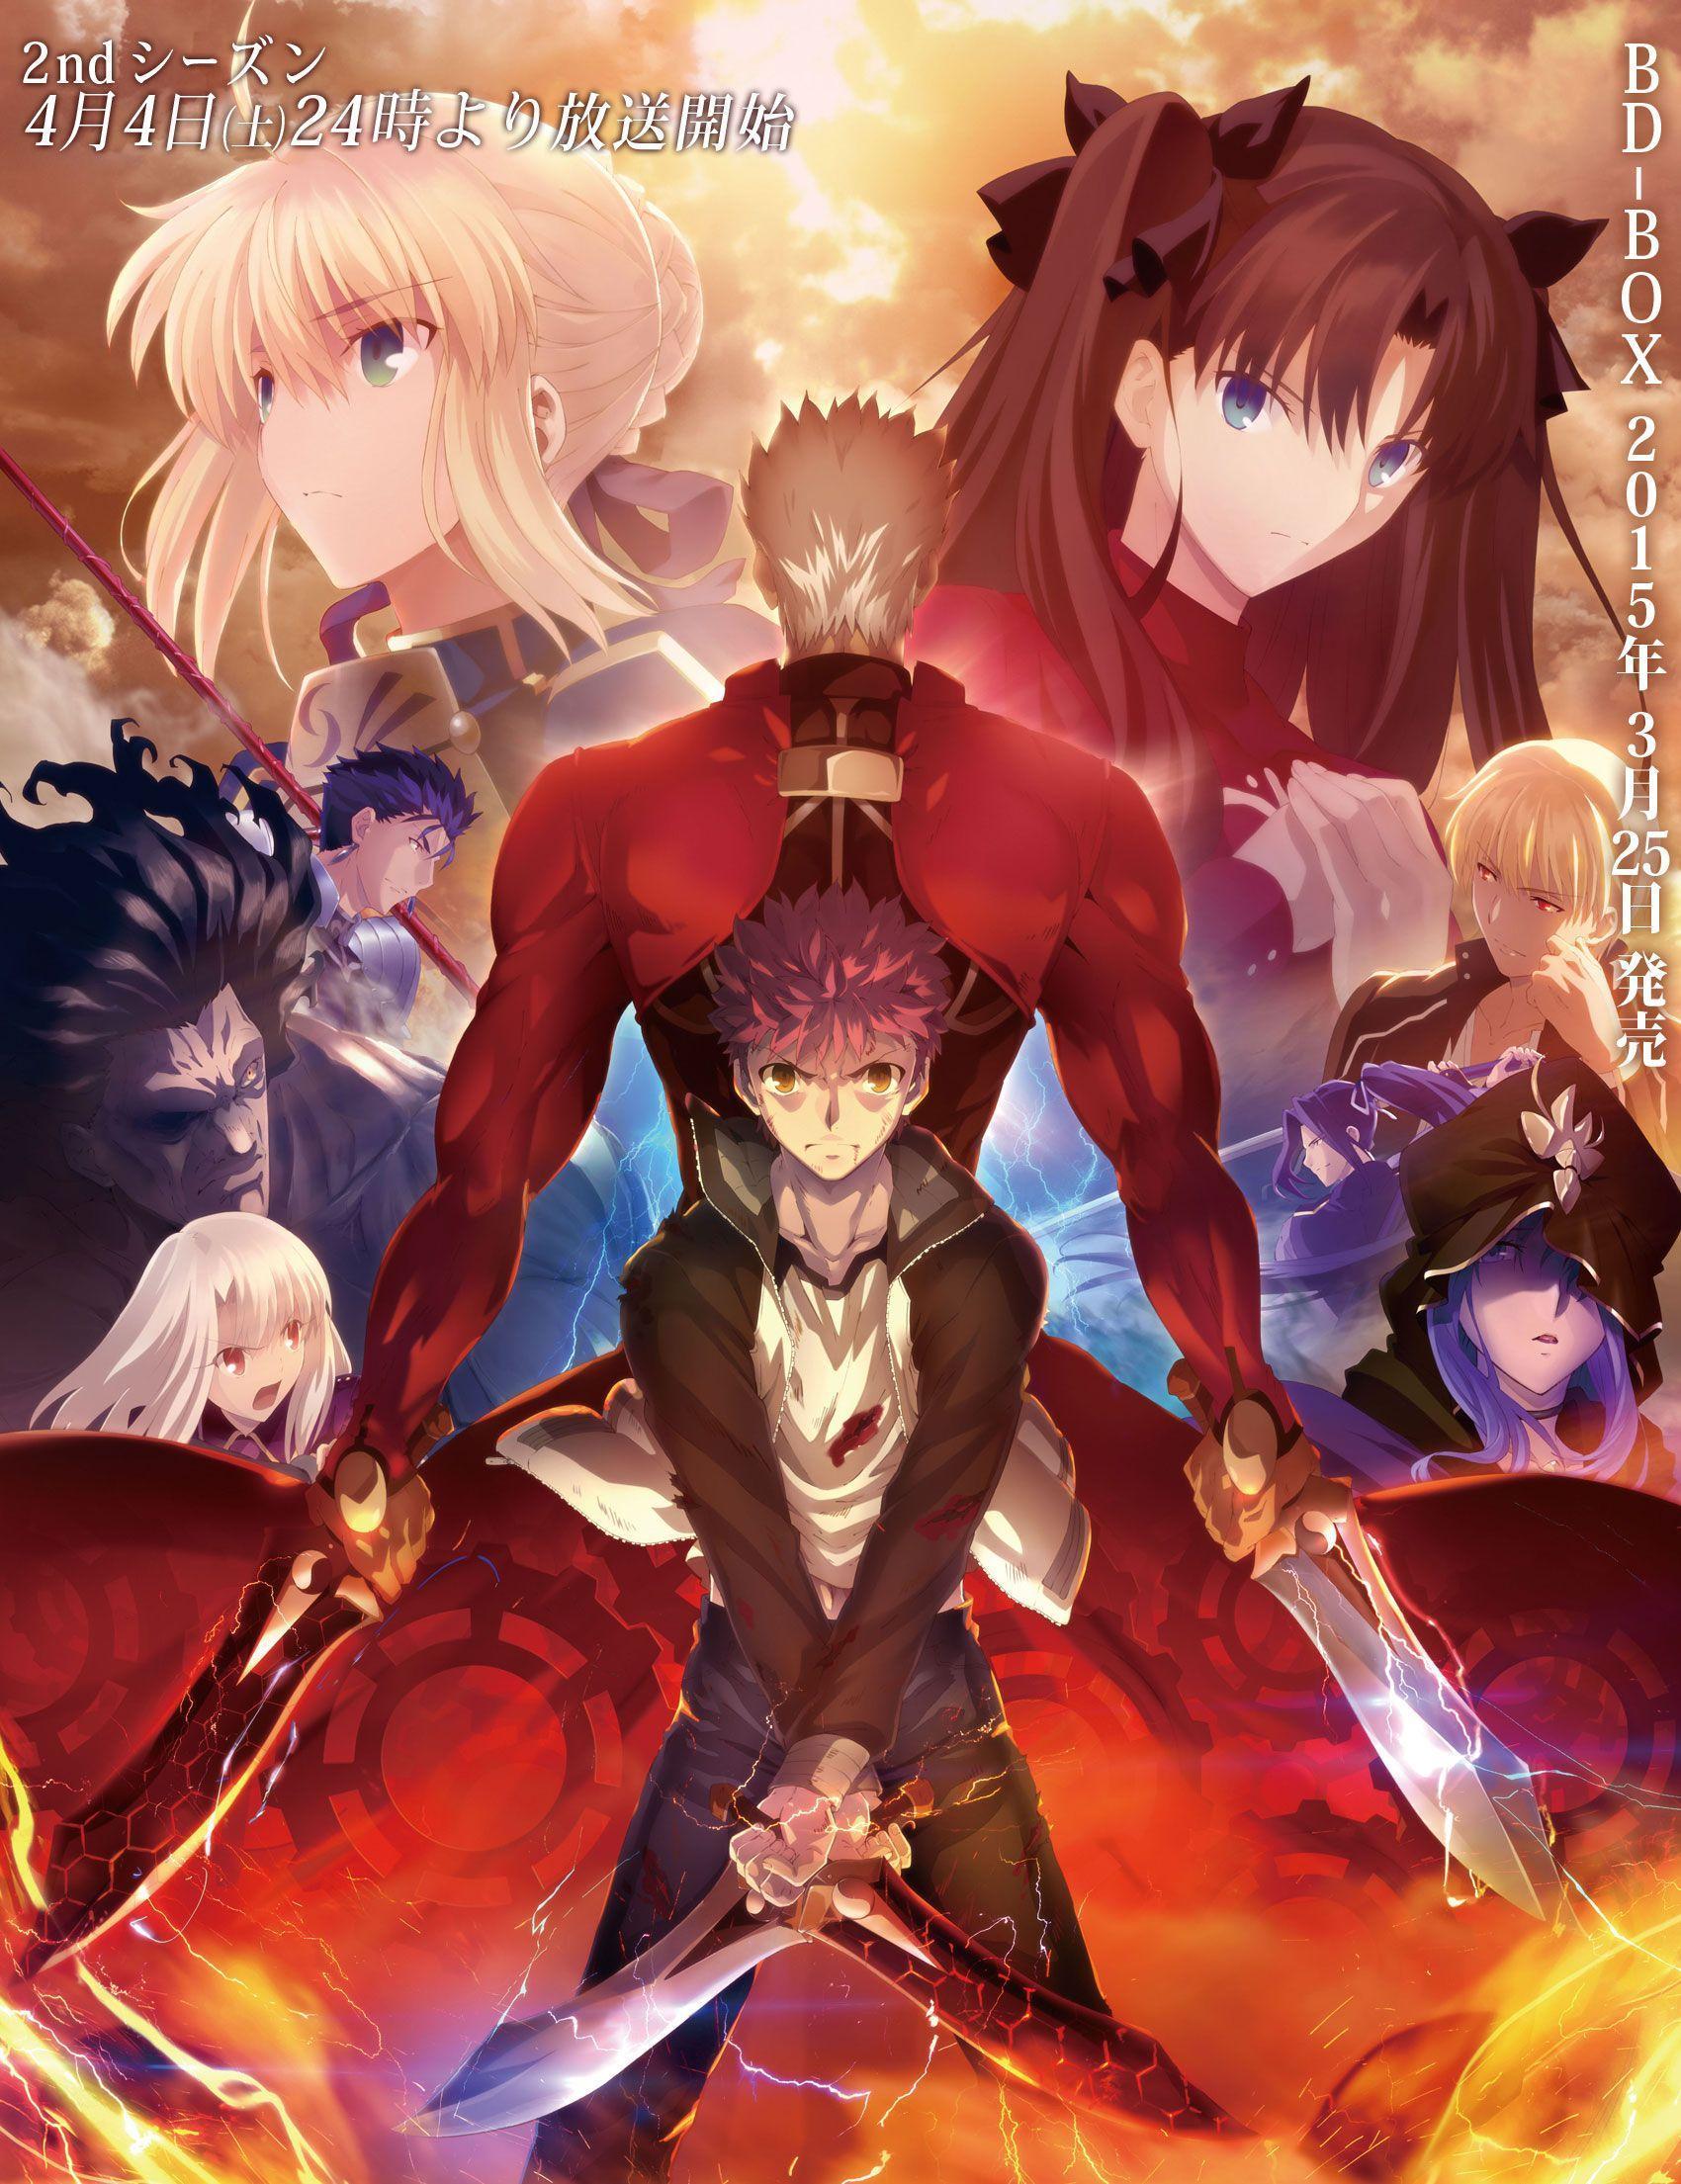 640x360px 74.35 KB Fate Stay Night Unlimited Blade Works